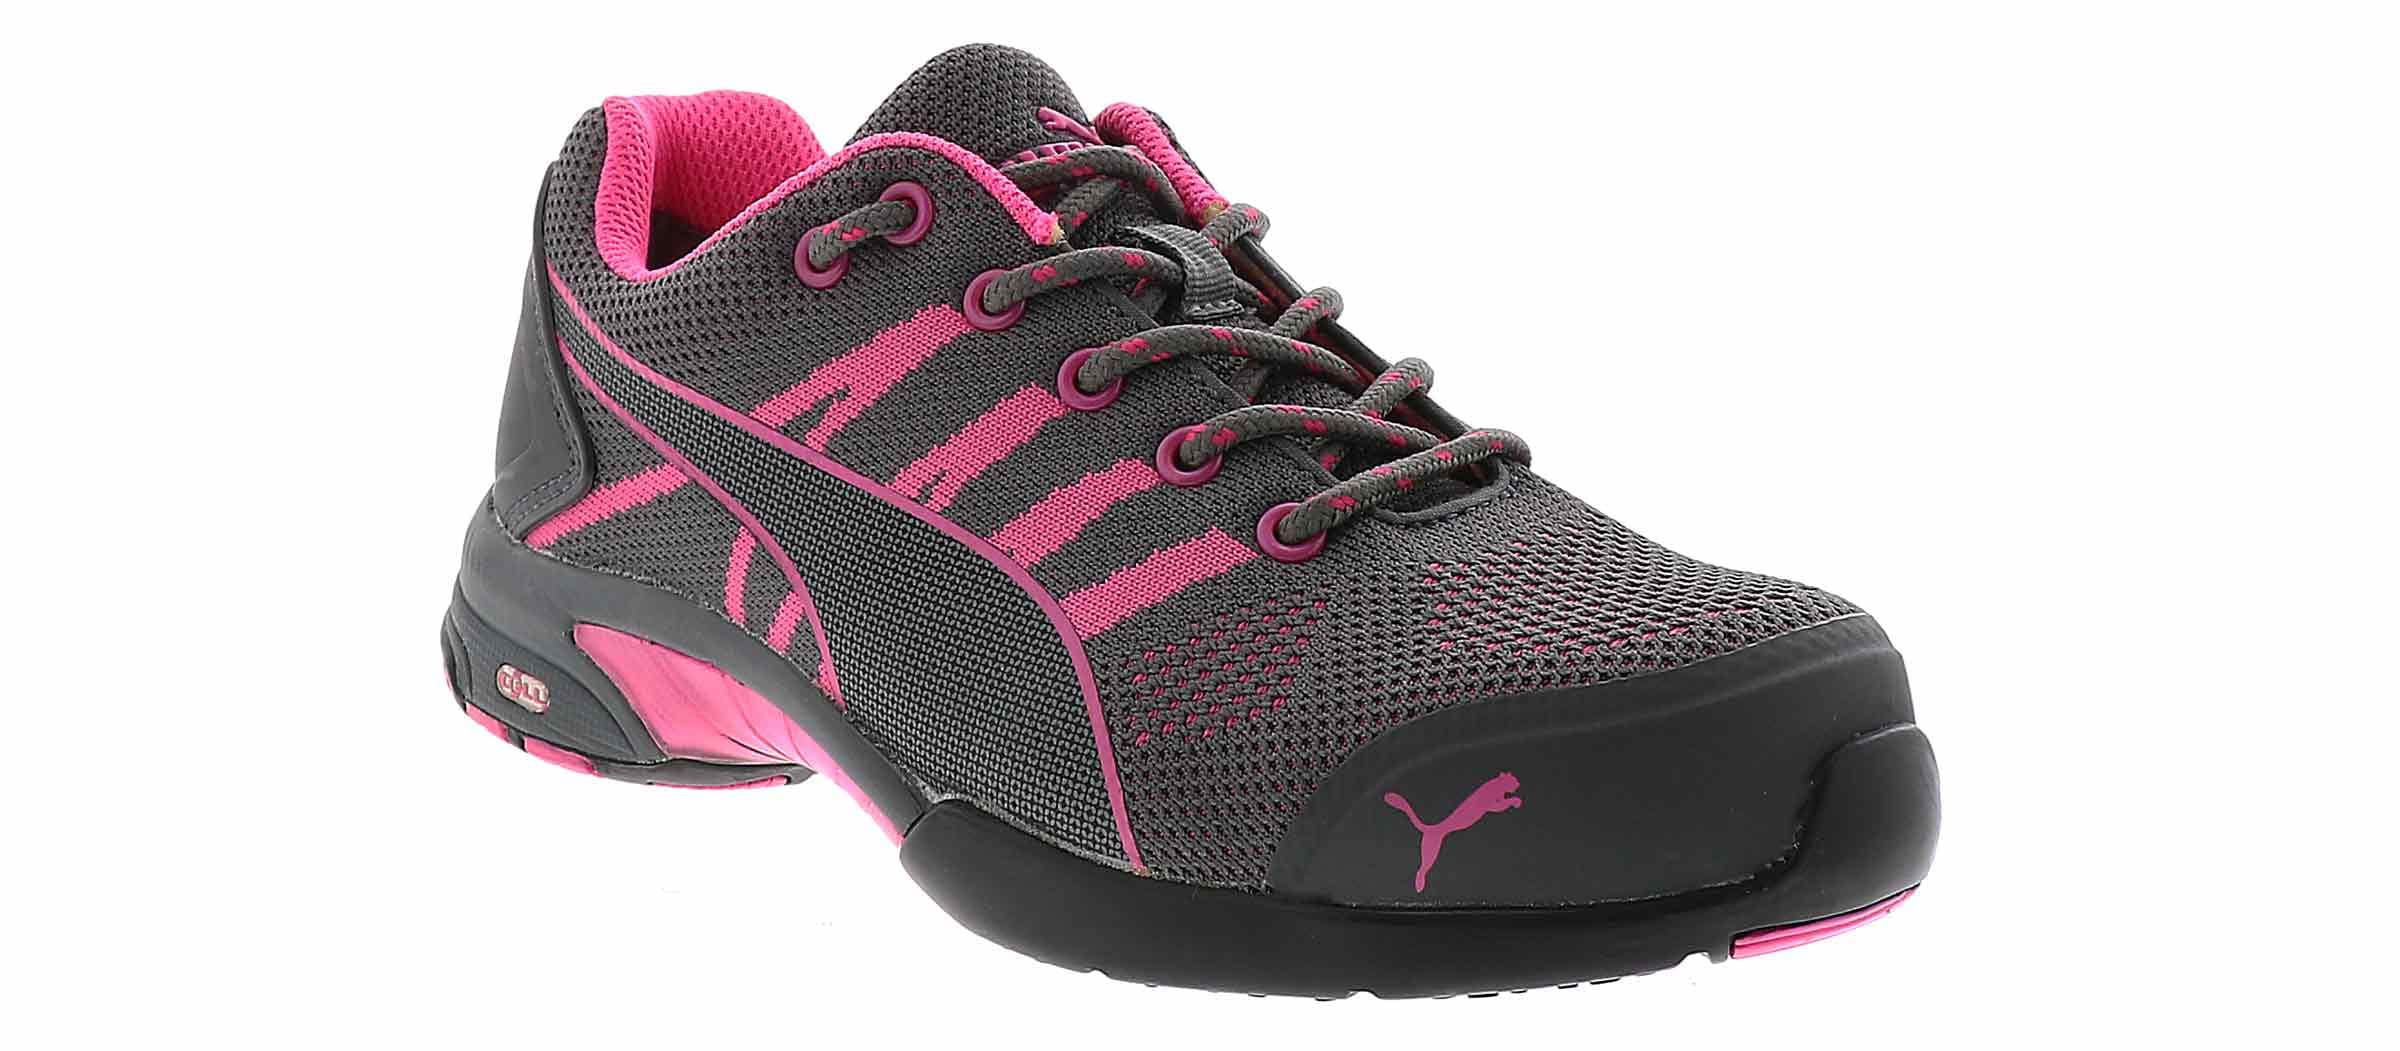 PUMA Safety Celerity Knit WNS Low ASTM SD Safety Shoes Safety Toe Metal Free Steel Toe Cap Slip Resistant Women